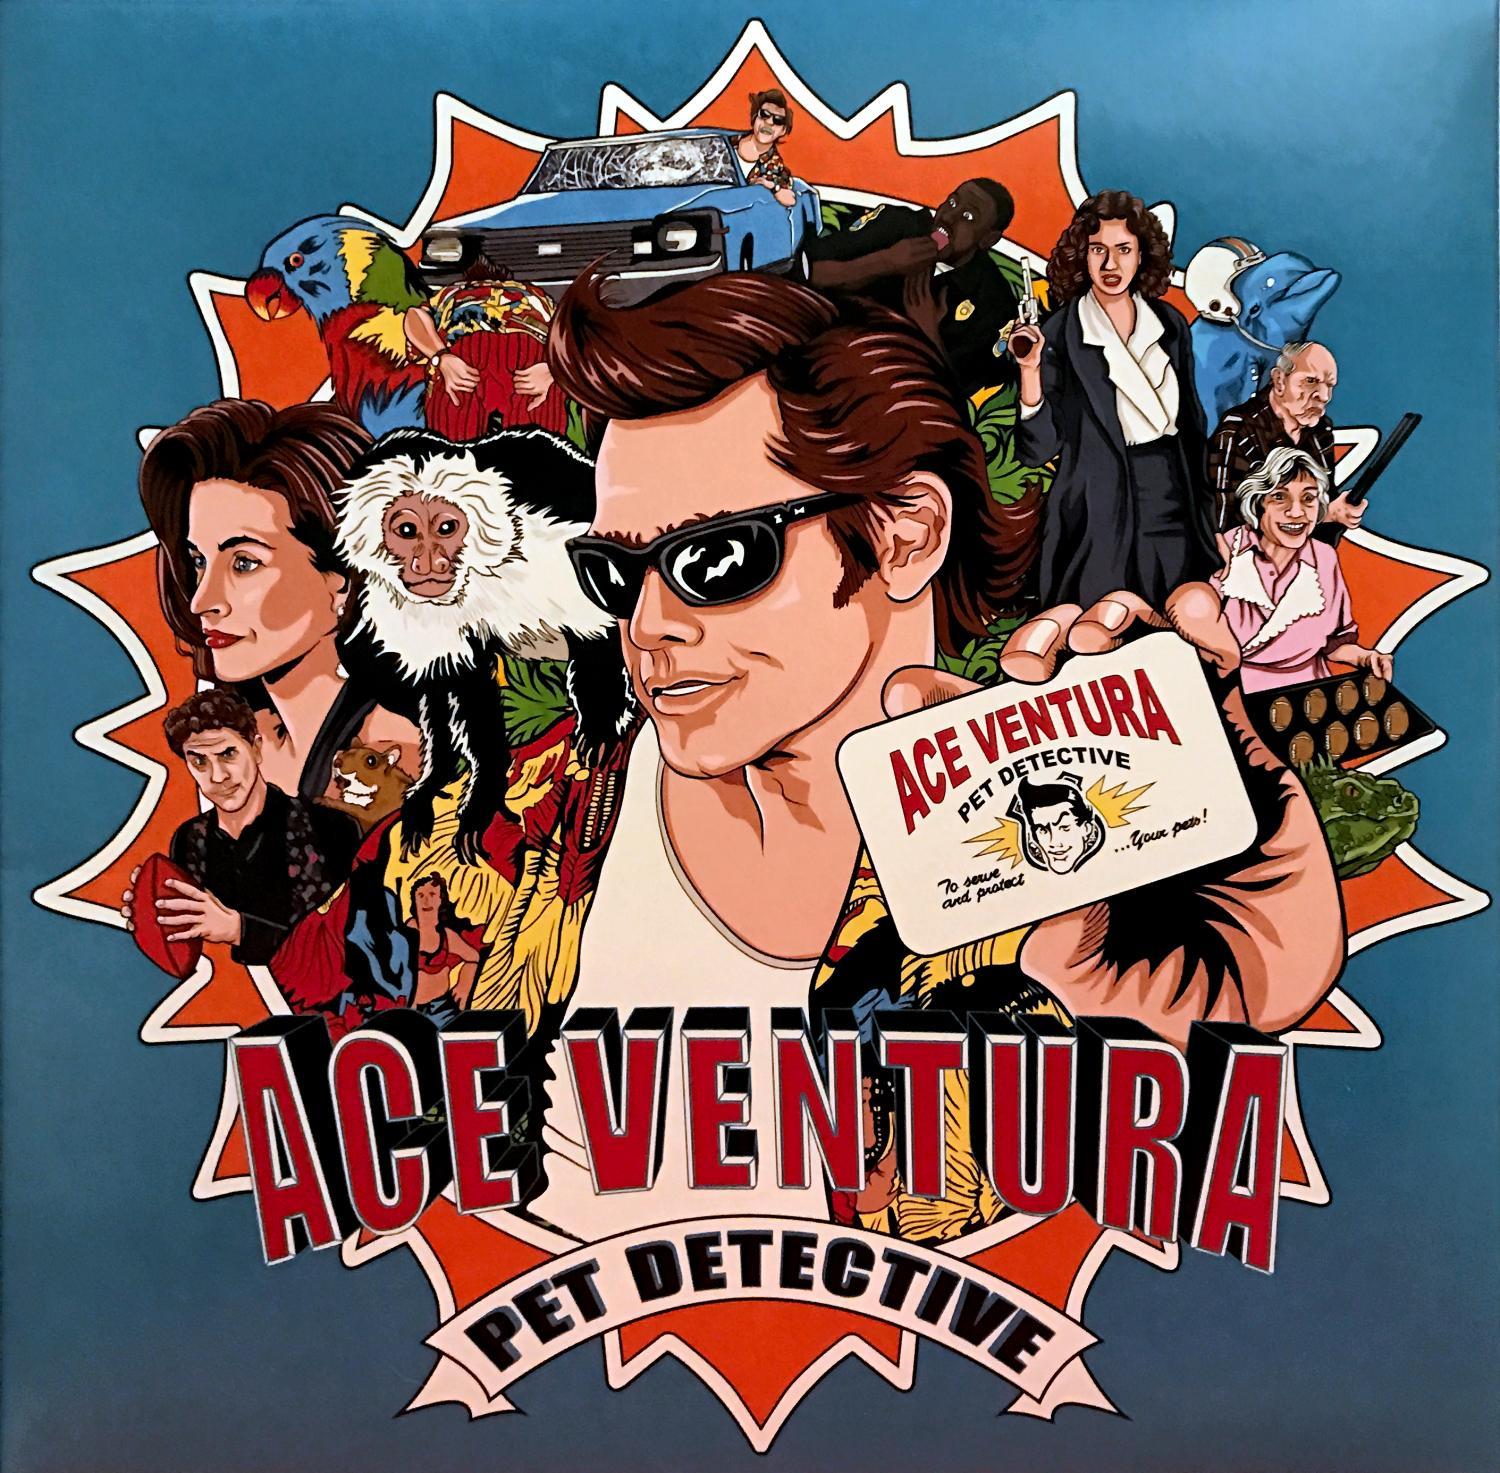 Ace Ventura Soundtrack on Vinyl for the first time